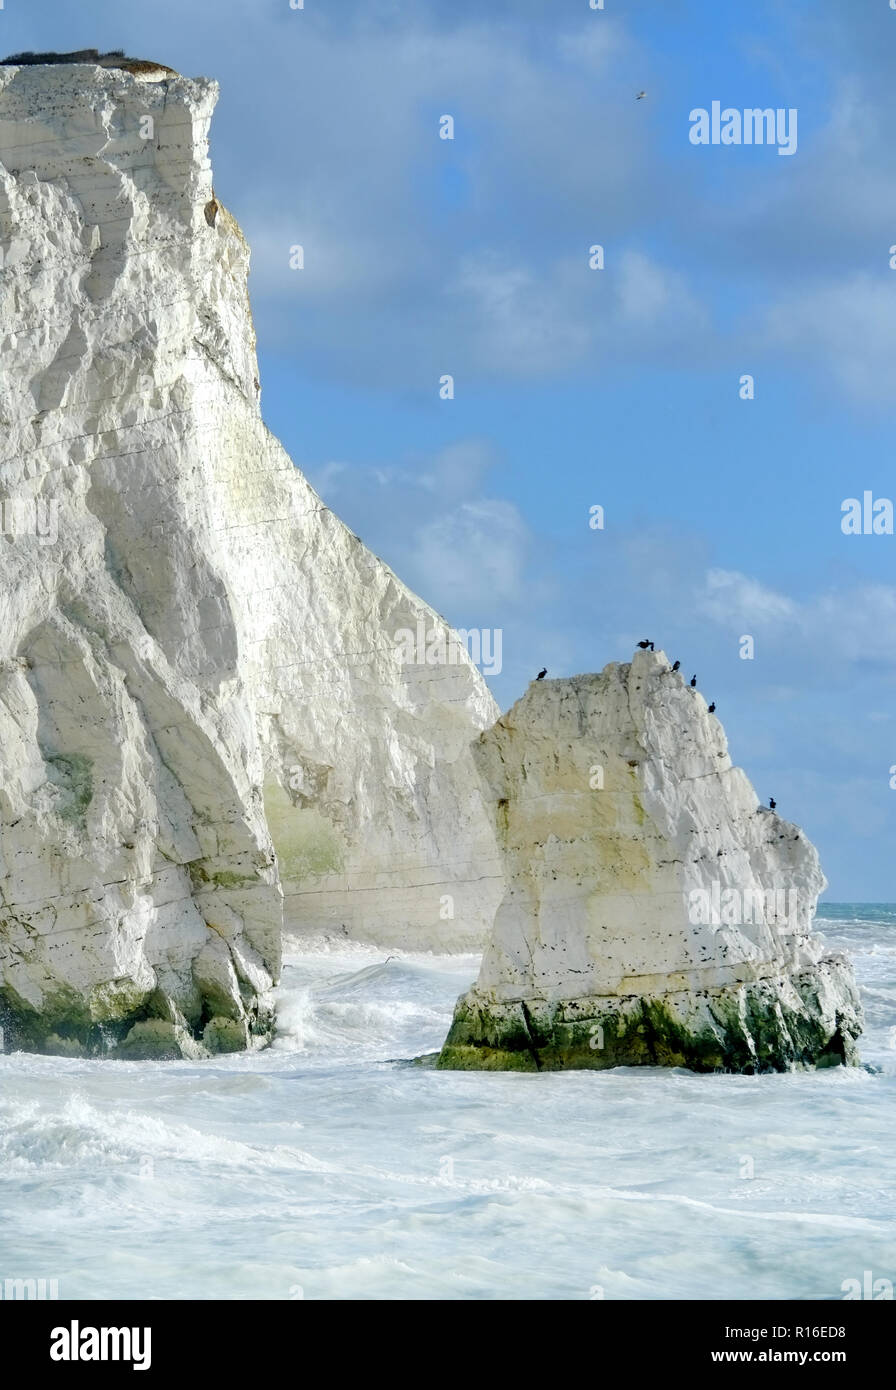 Seaford. East Sussex, UK. 9th November 2018. Chalky white water surrounds the chalk cliffs of Seaford Head, East Sussex. The milky colour is created by rough seas stirring up dissolved chalk from recent cliff falls. Credit: Peter Cripps/Alamy Live News Stock Photo